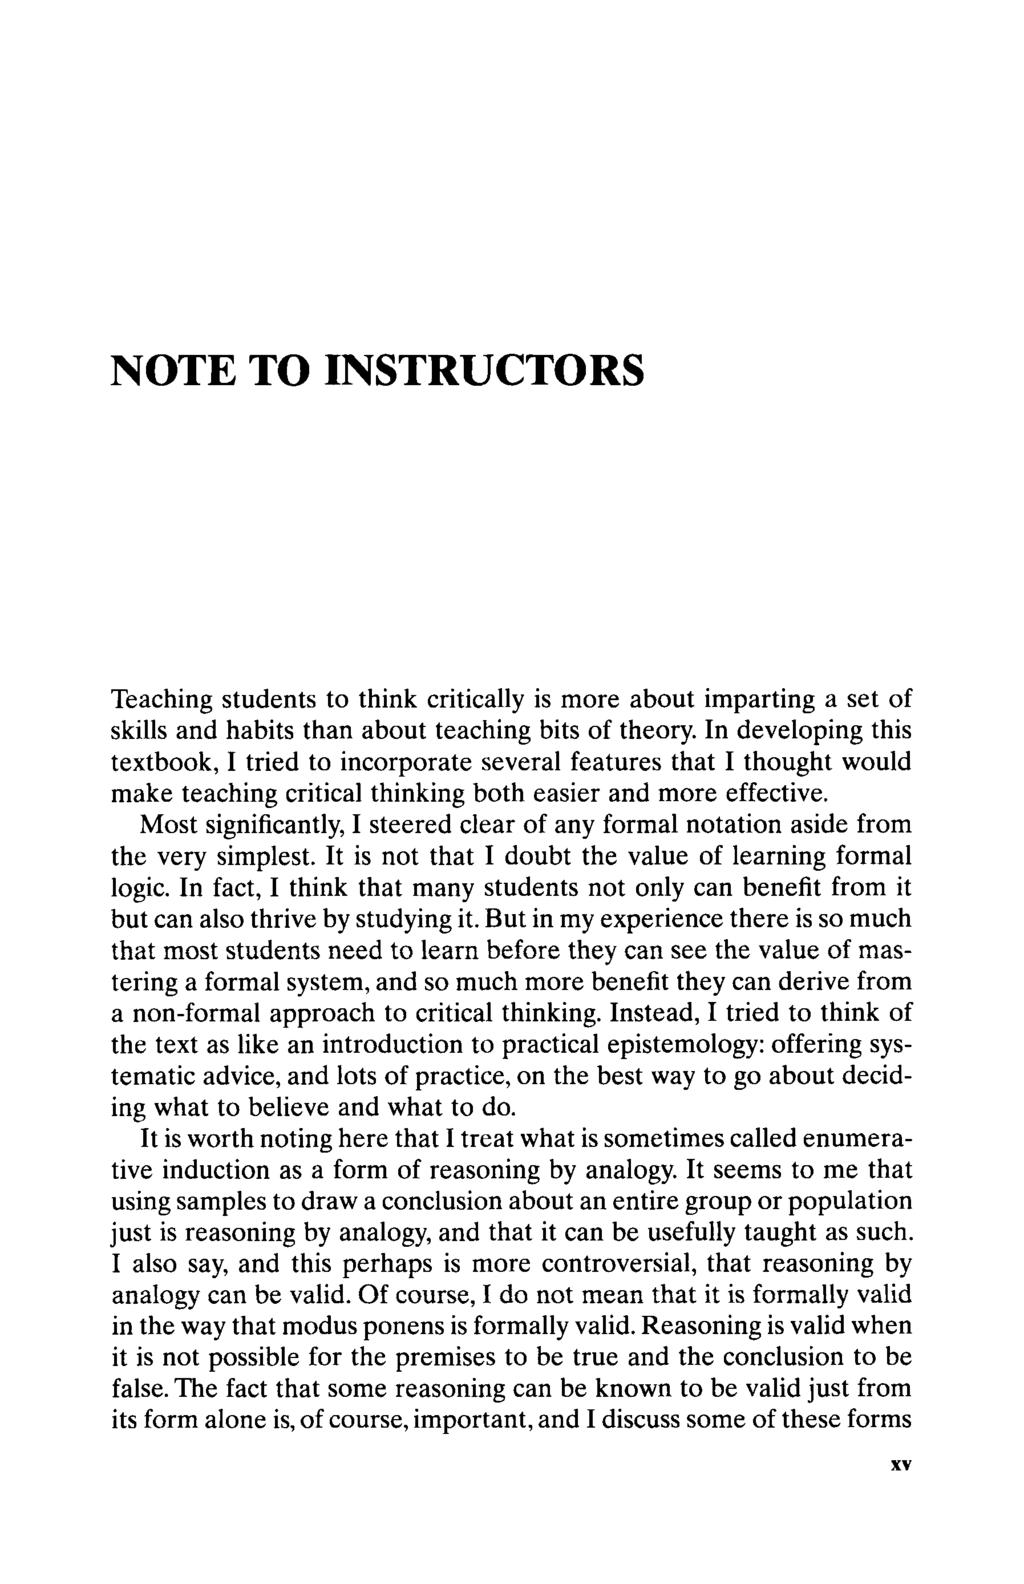 NOTE TO INSTRUCTORS Teaching students to think critically is more about imparting a set of skills and habits than about teaching bits of theory.